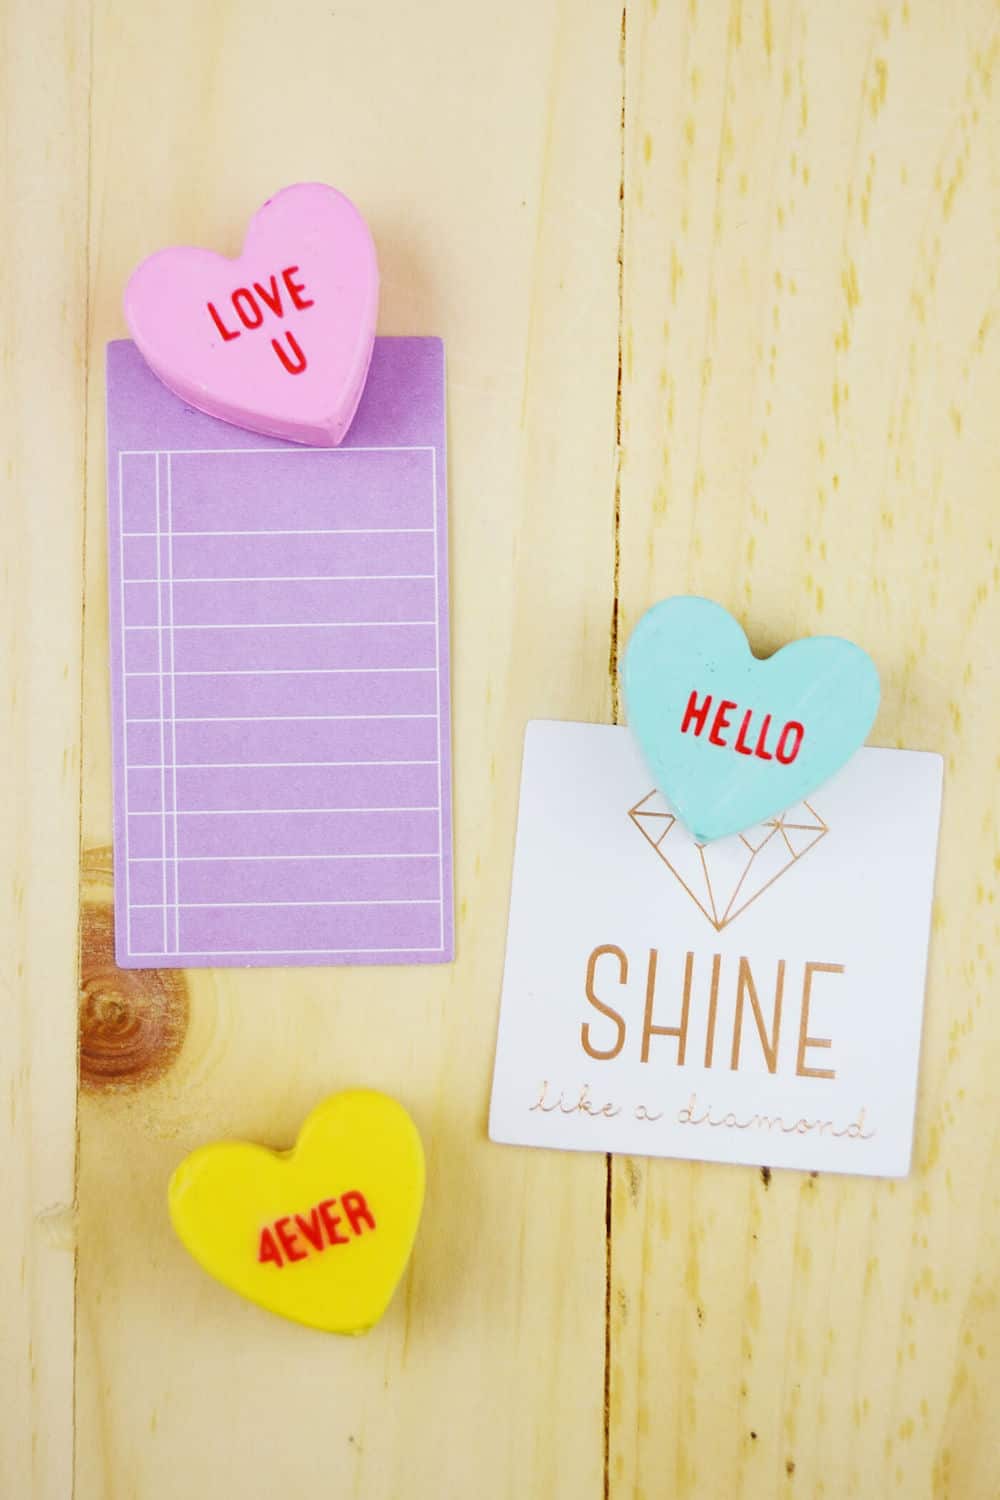 Make plaster magnets shaped like hearts for Valentine's Day